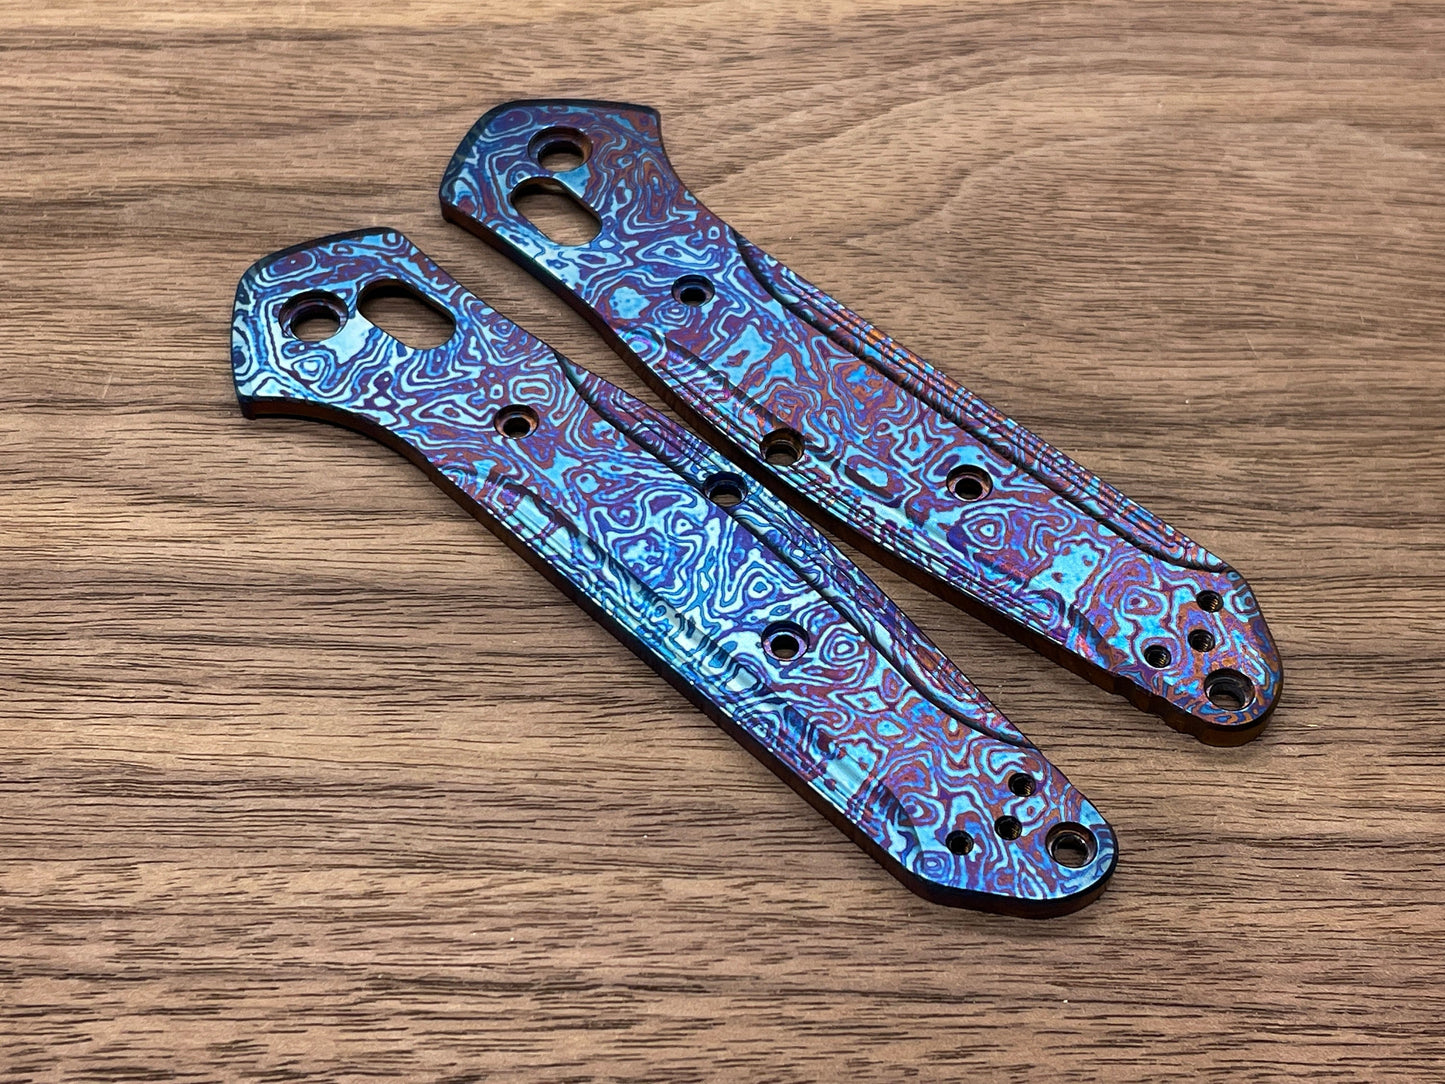 Flamed ALIEN heat ano engraved Titanium Scales for Benchmade 940 Osborne